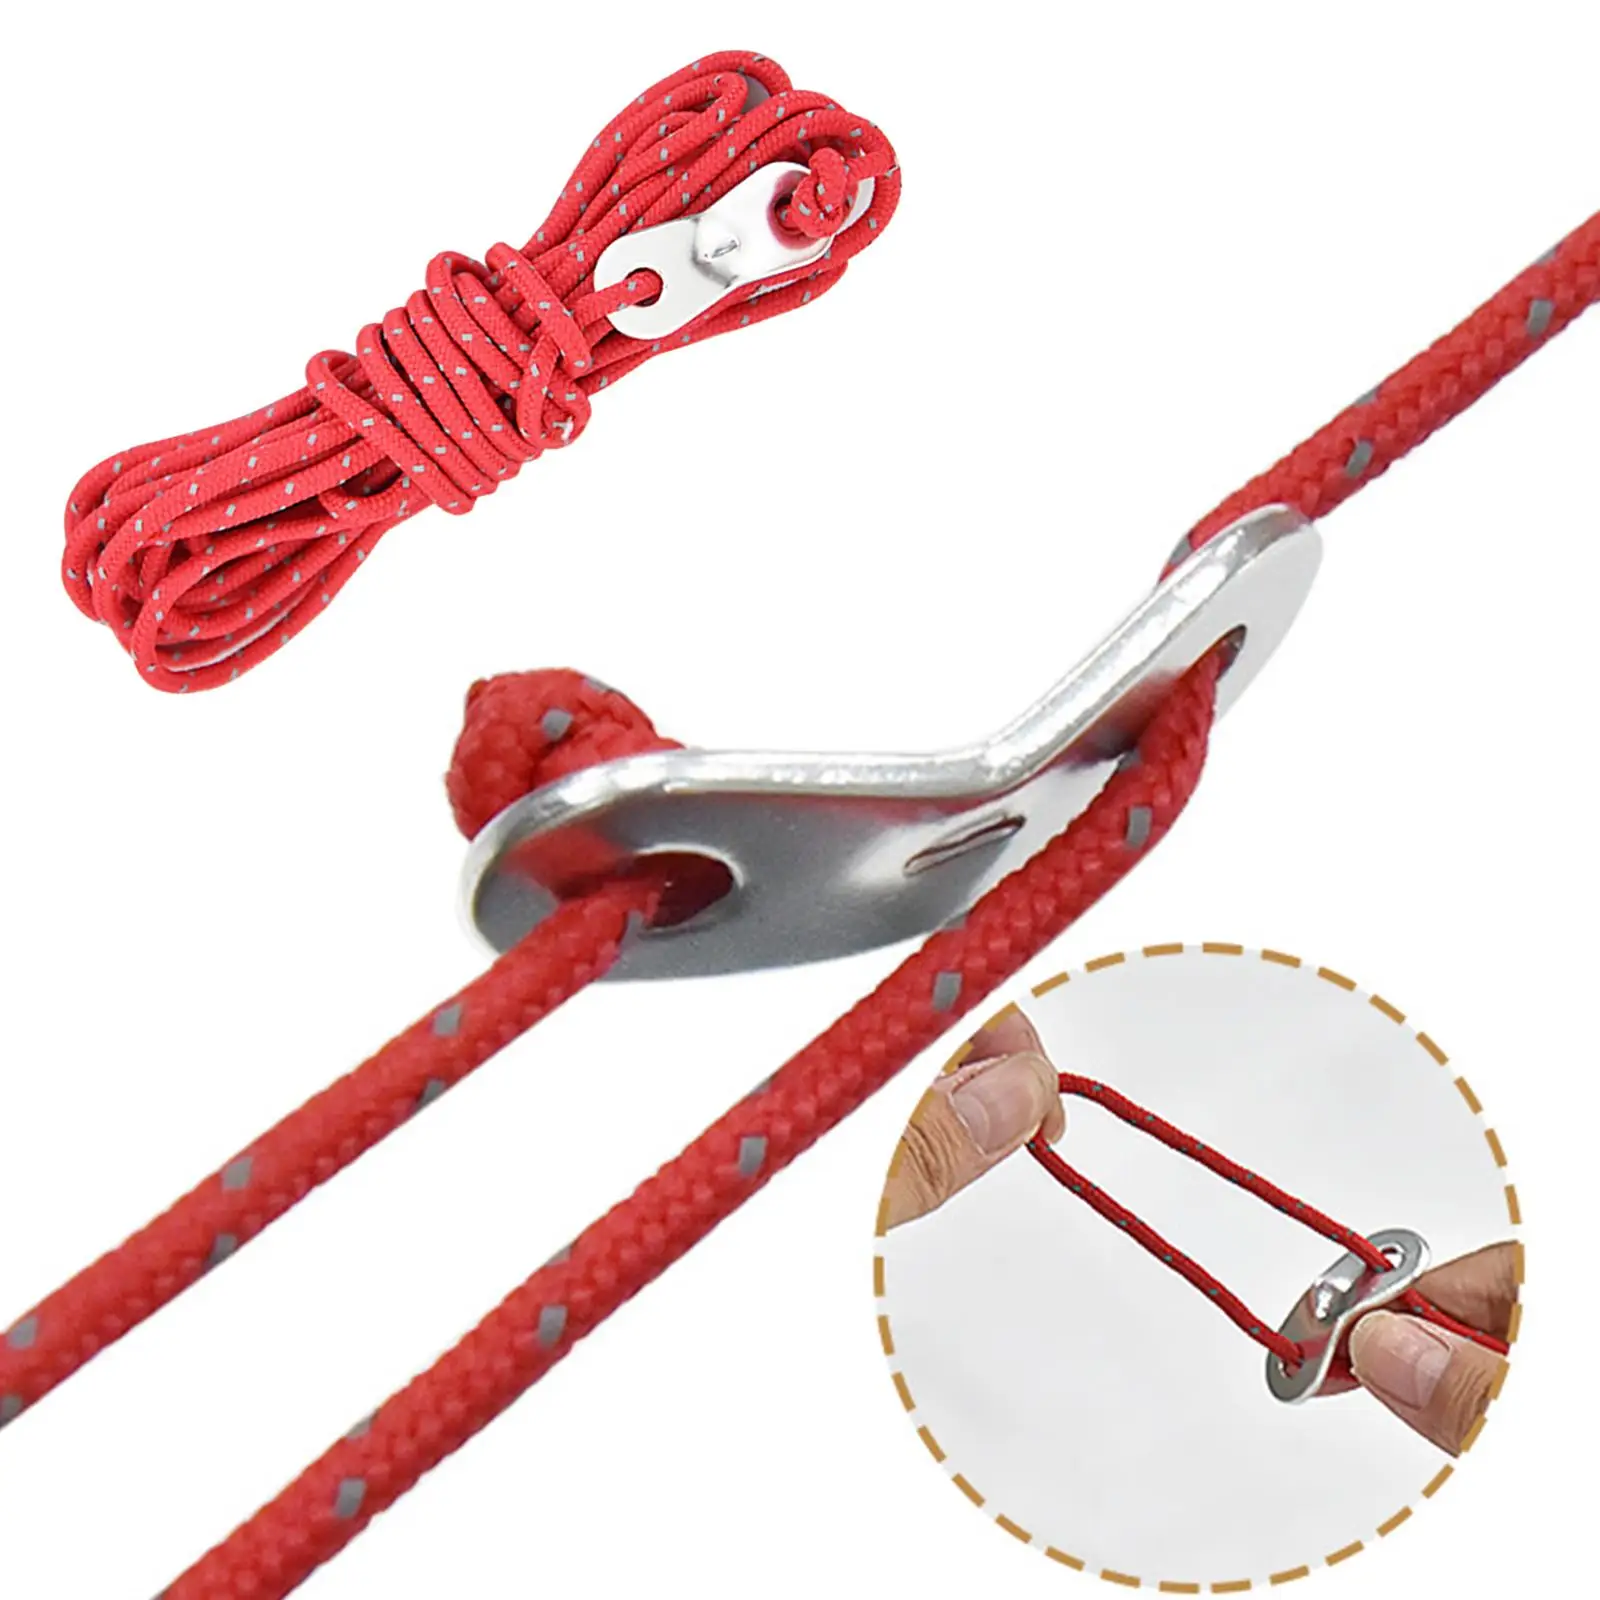 2x Adjustable Wind Rope with Adjustment Buckle Accs for Camping Tent Canopy Survival